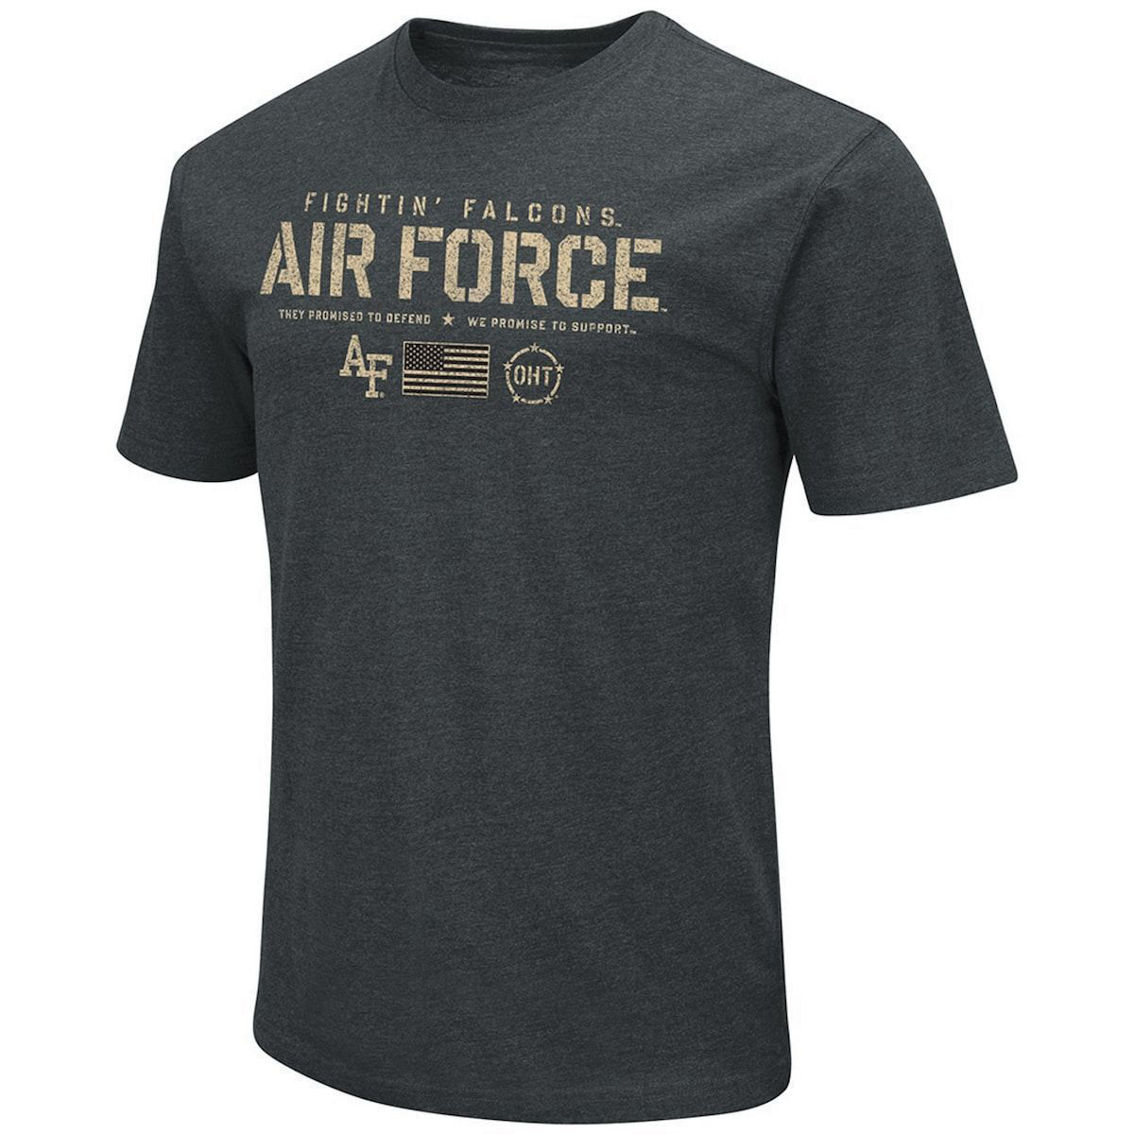 Colosseum Men's Heathered Black Air Force Falcons OHT Military Appreciation Flag 2.0 T-Shirt - Image 3 of 4